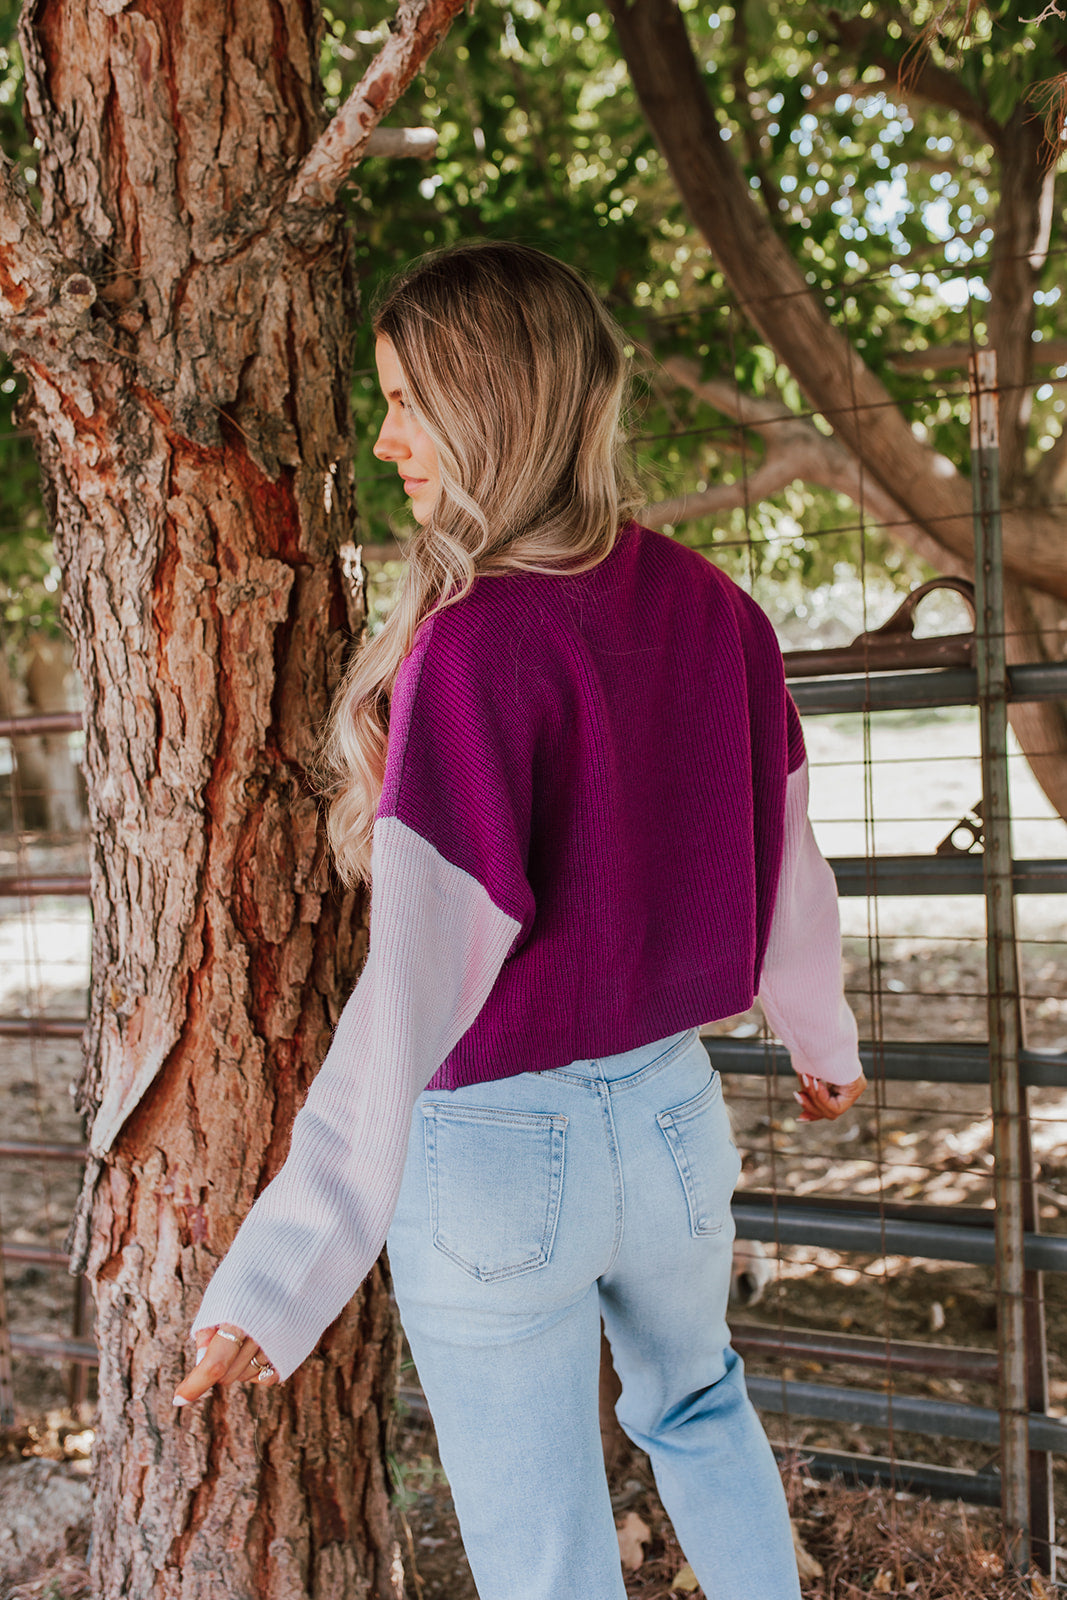 How to Wear Magenta Purple - 3 Outfit Ideas